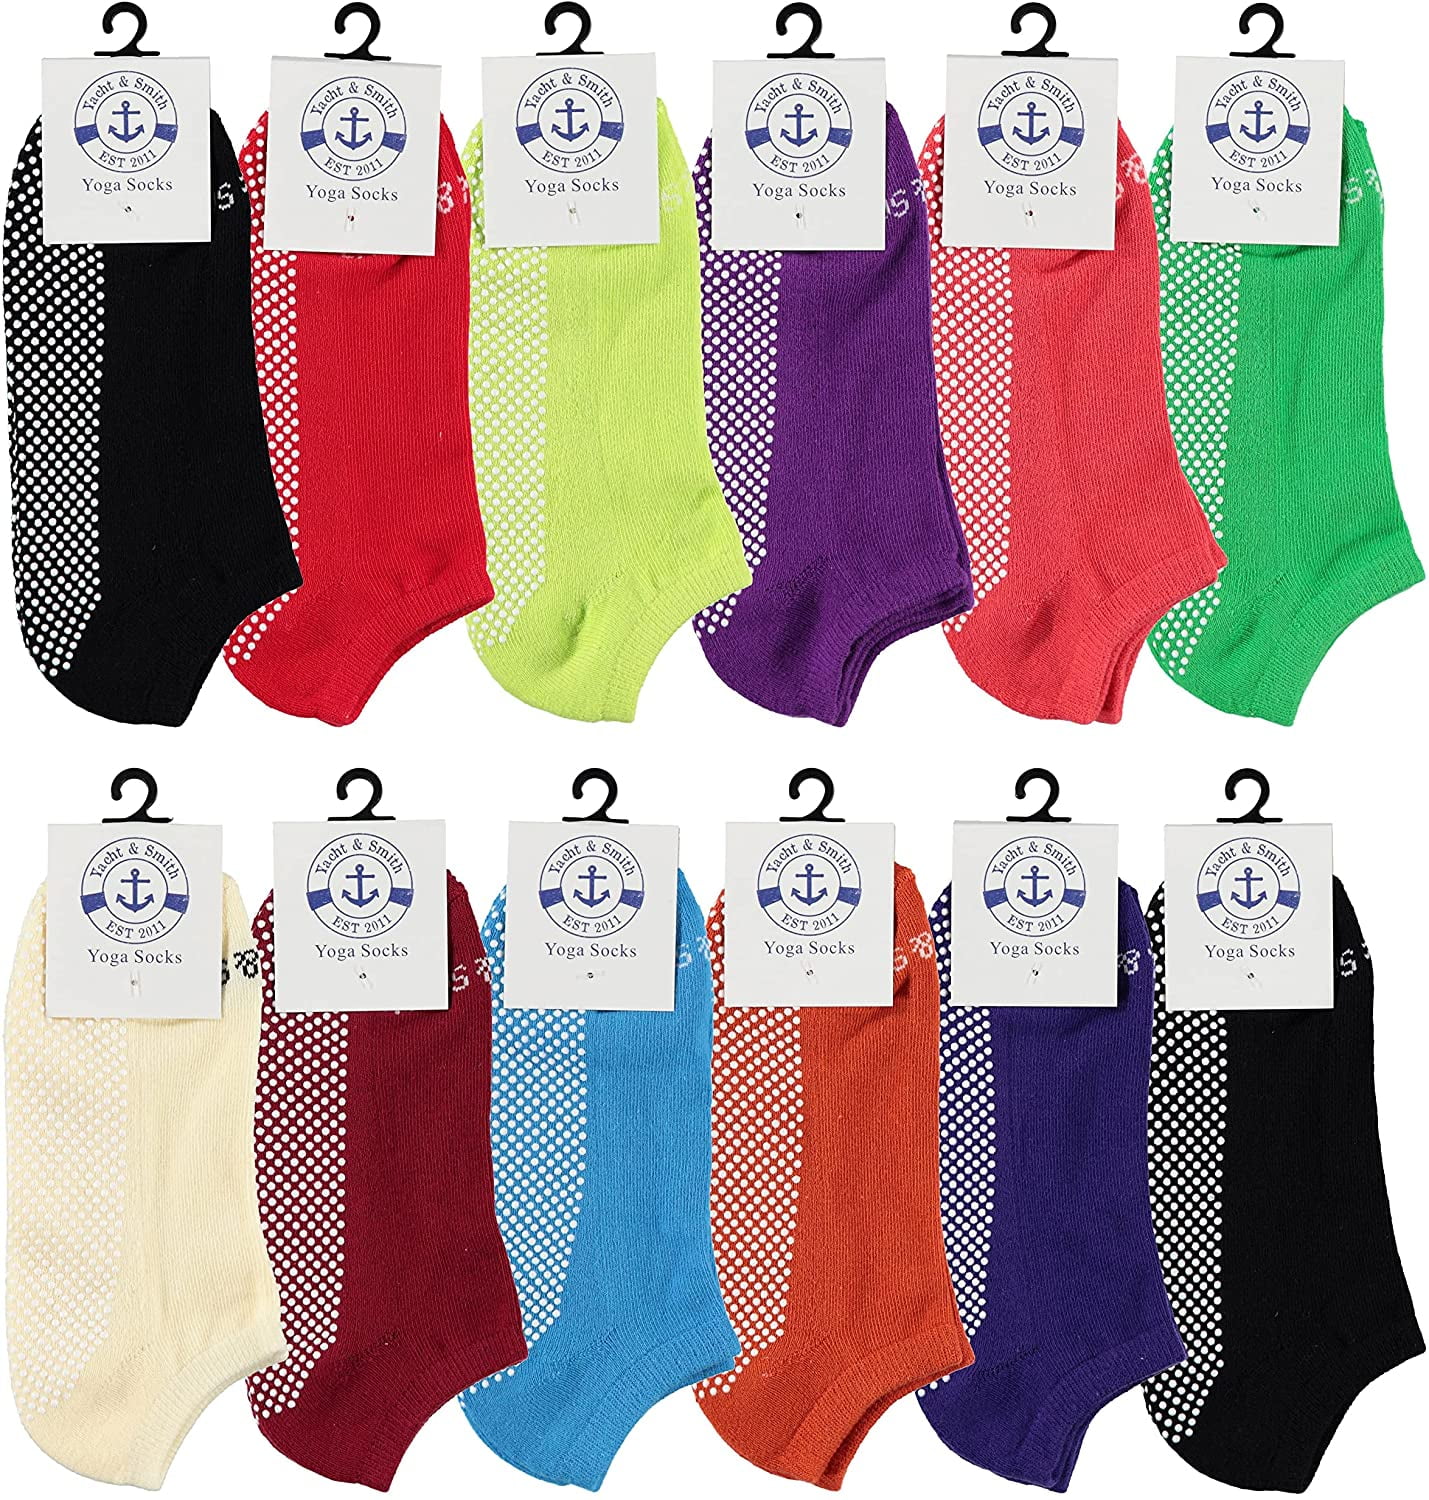 Women's Non Slip No-Skid Socks with Grips, 97% Cotton, For Hospital, Yoga,  Pilates, Barre, Grippy Ankle Sock, 9-11